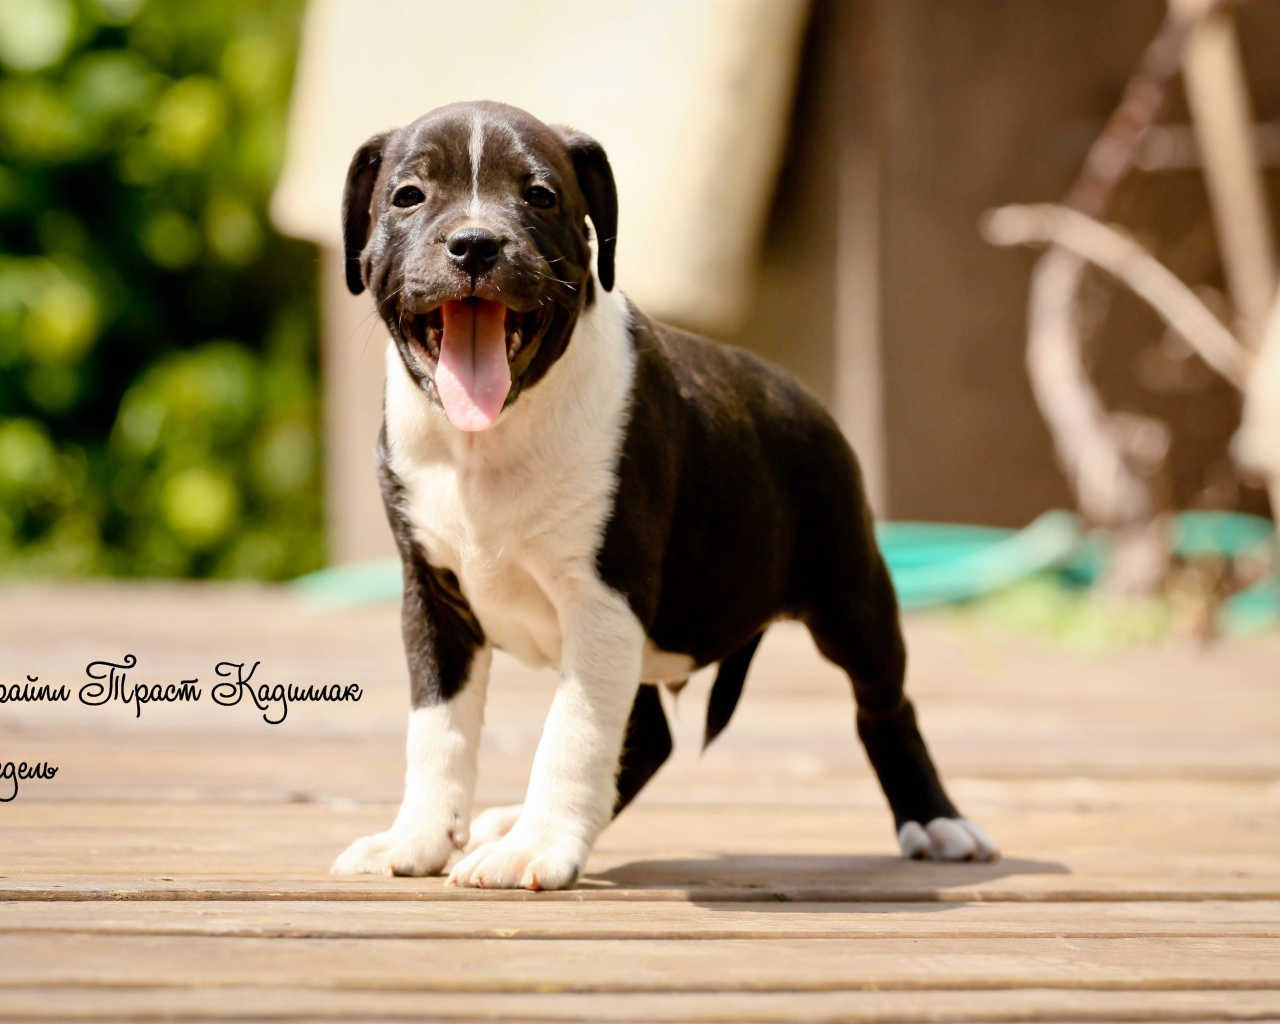 The Puppy Staffordshire Bull Terrier